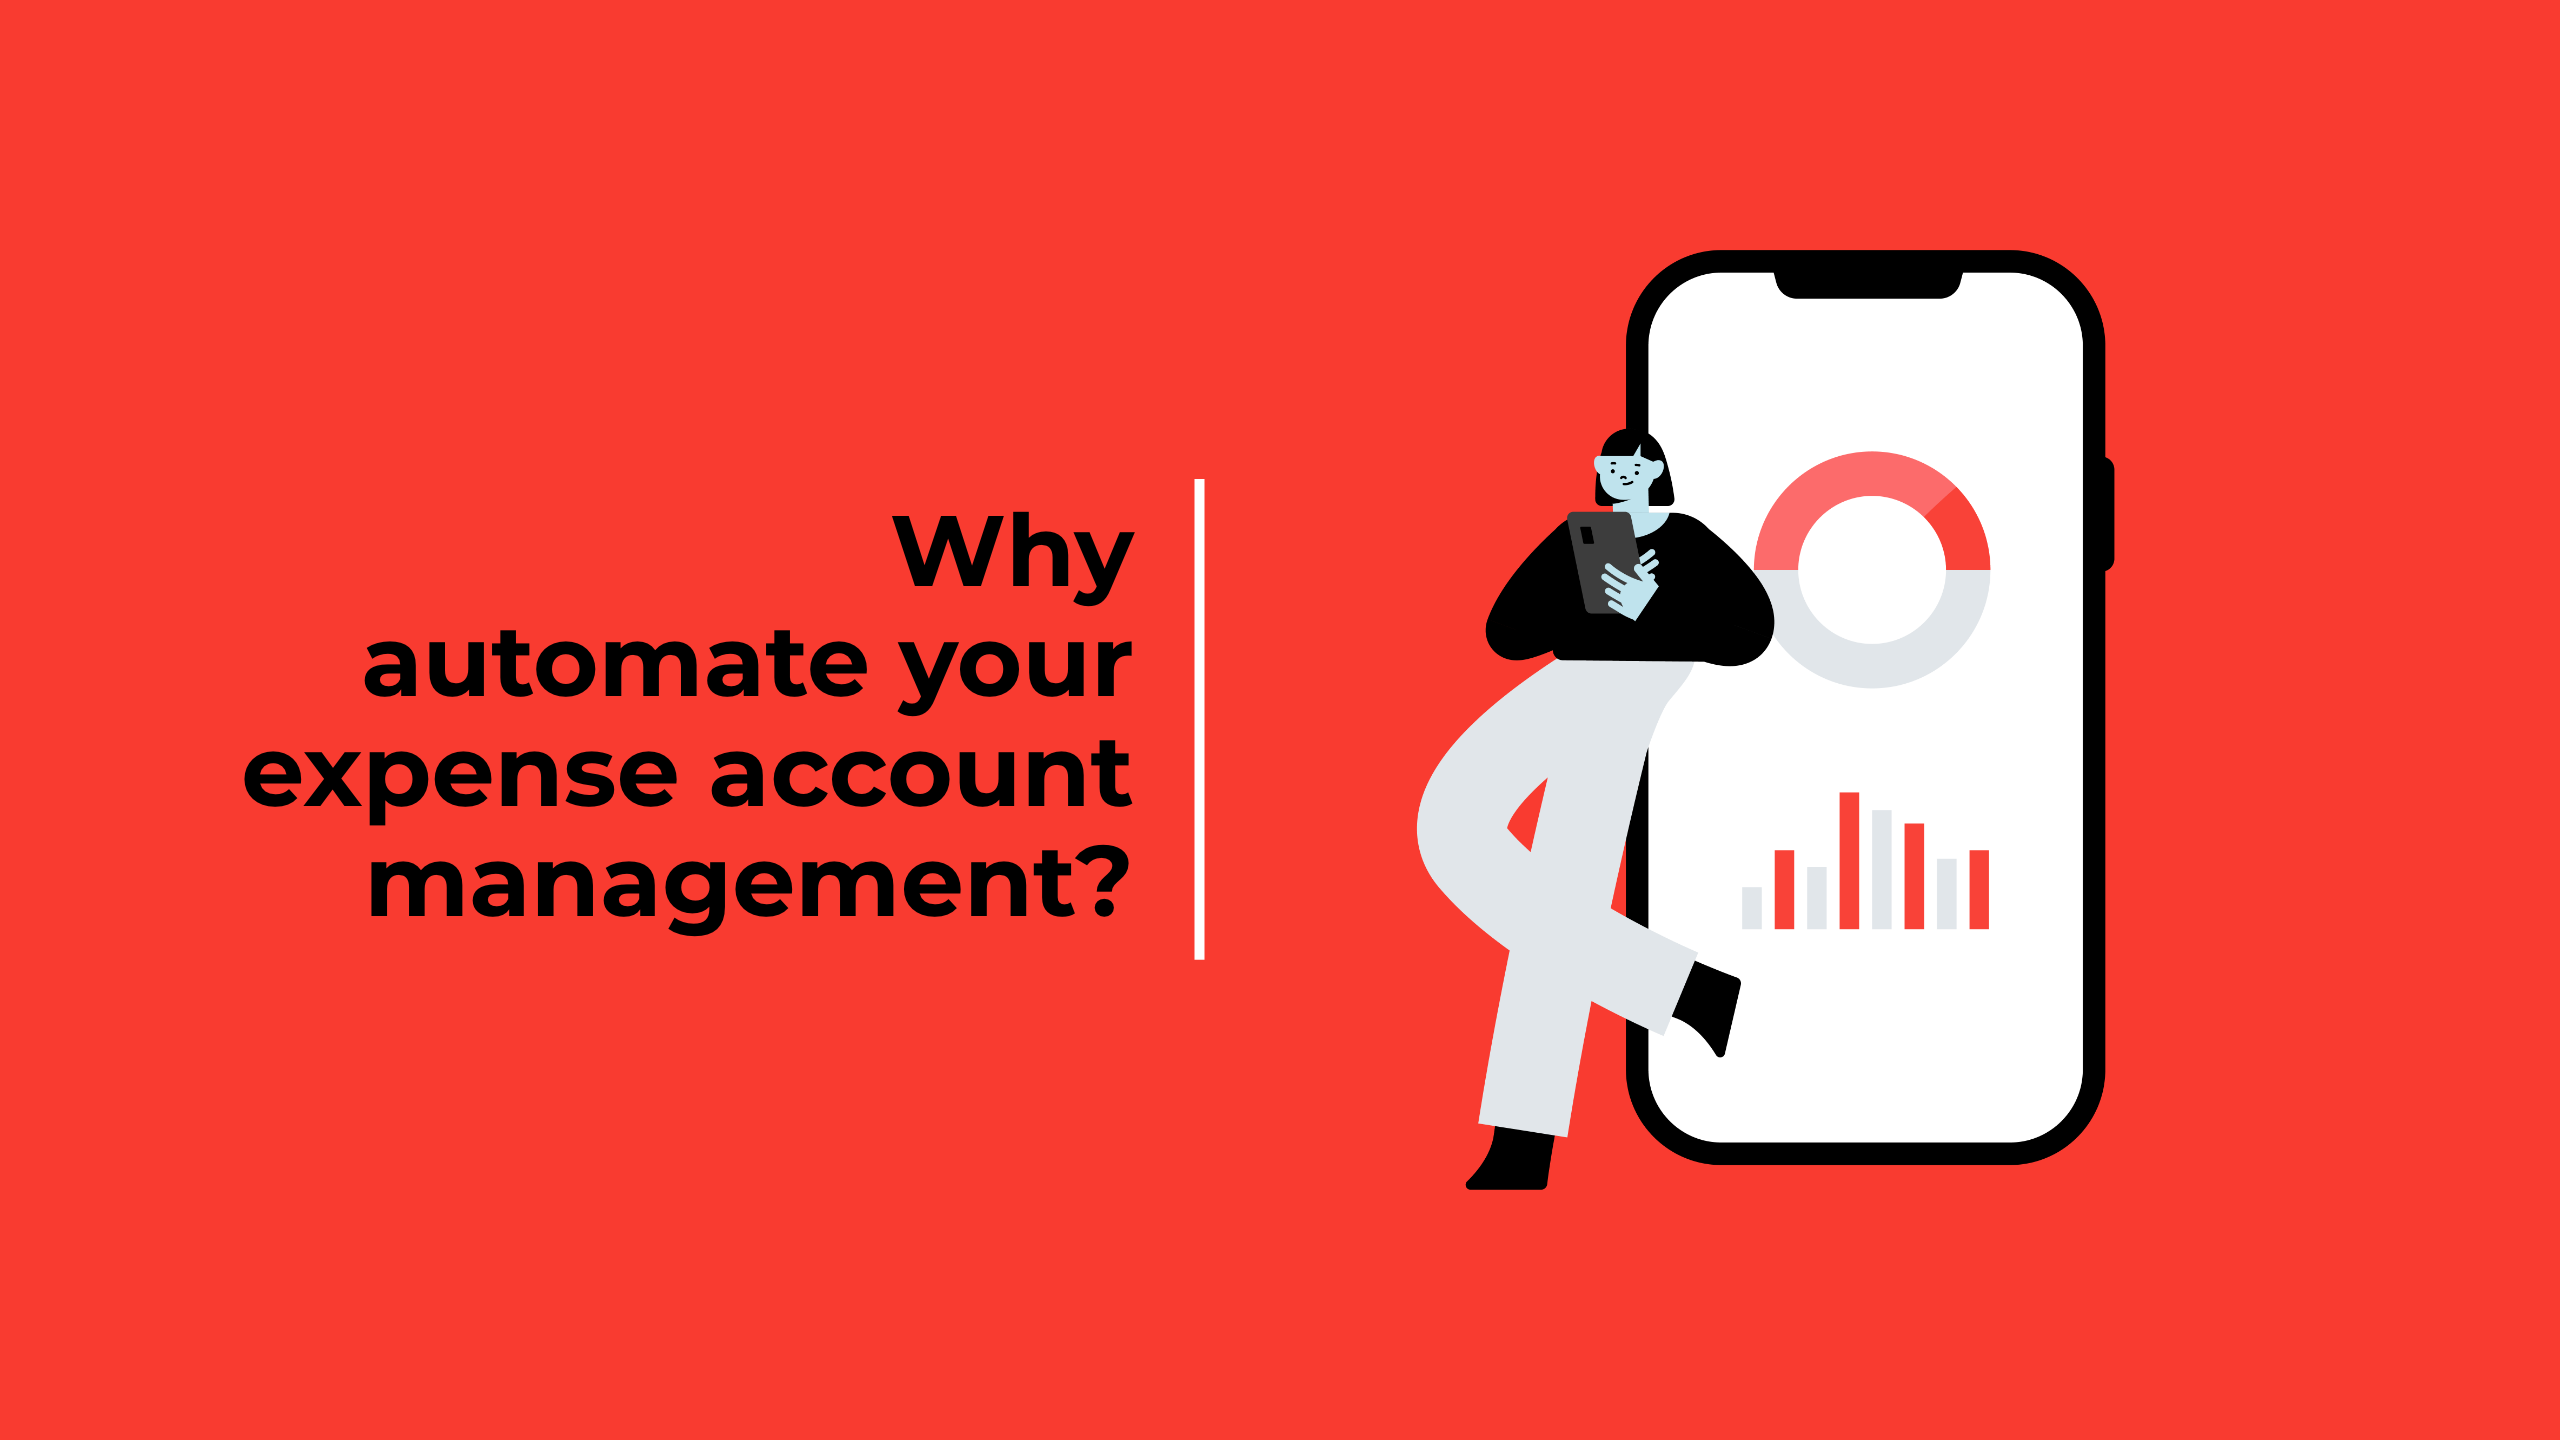 Why automate the management of your expense accounts?